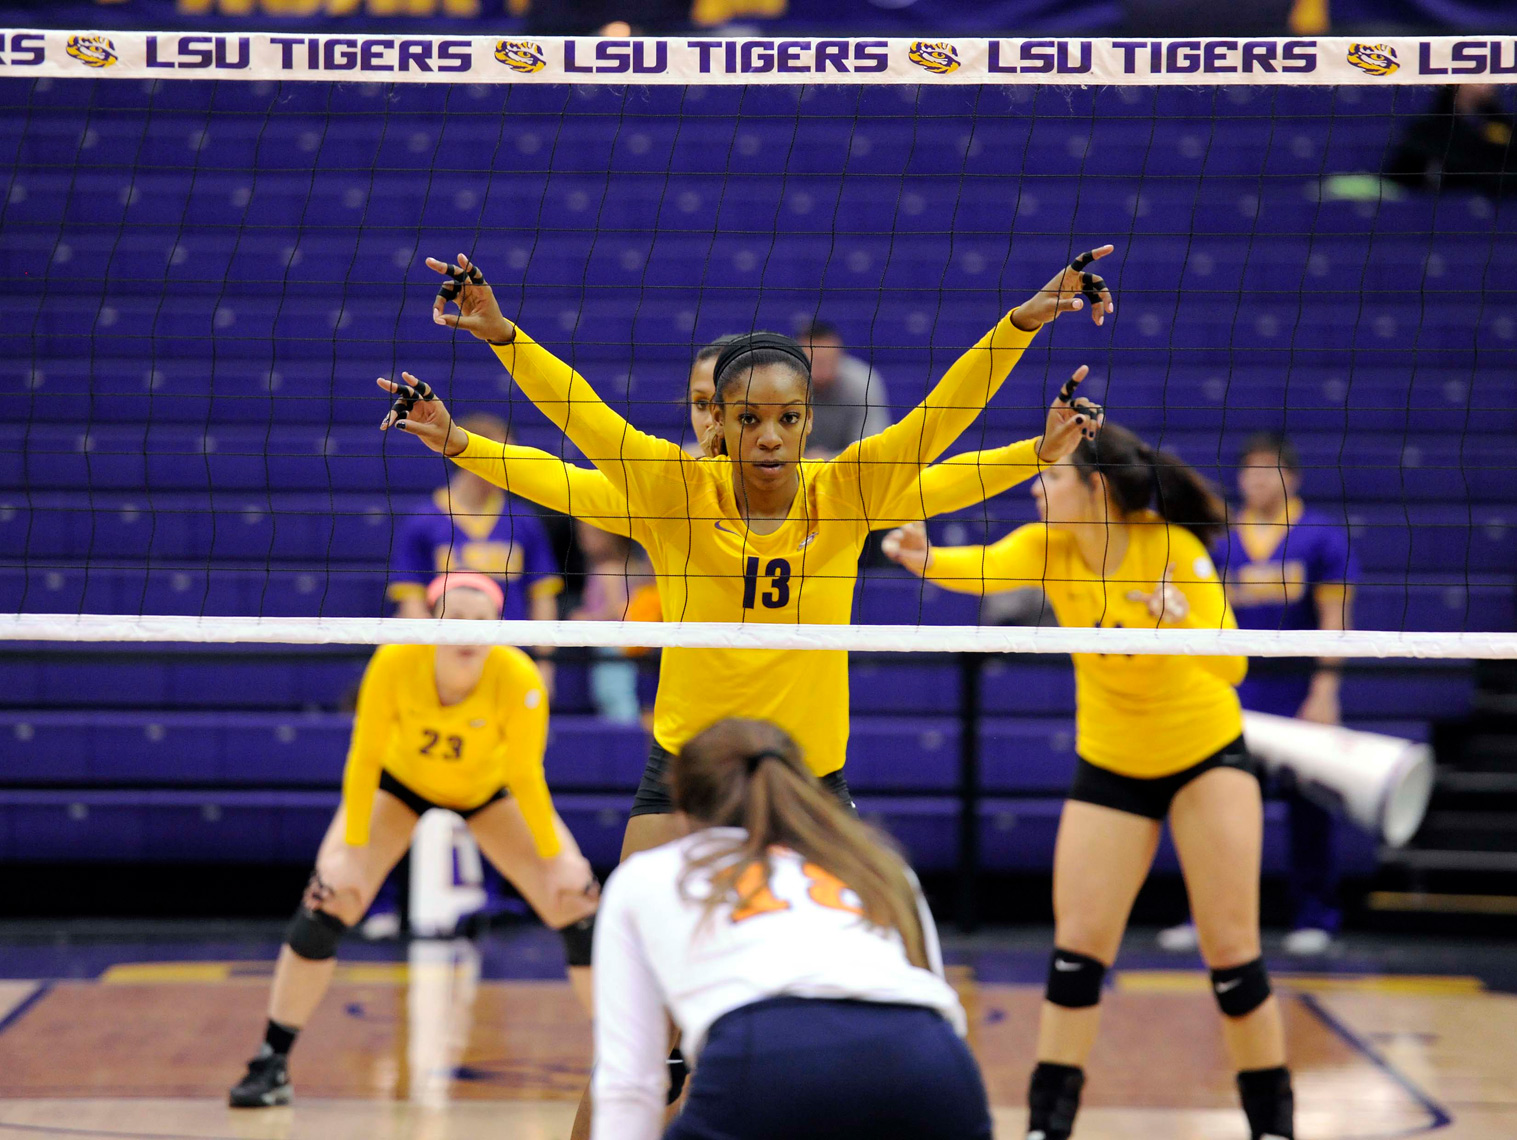 023_PhotoFolio_Vball_JF_05_DSC0254_Volleyball_vs_Tennessee_JF_09